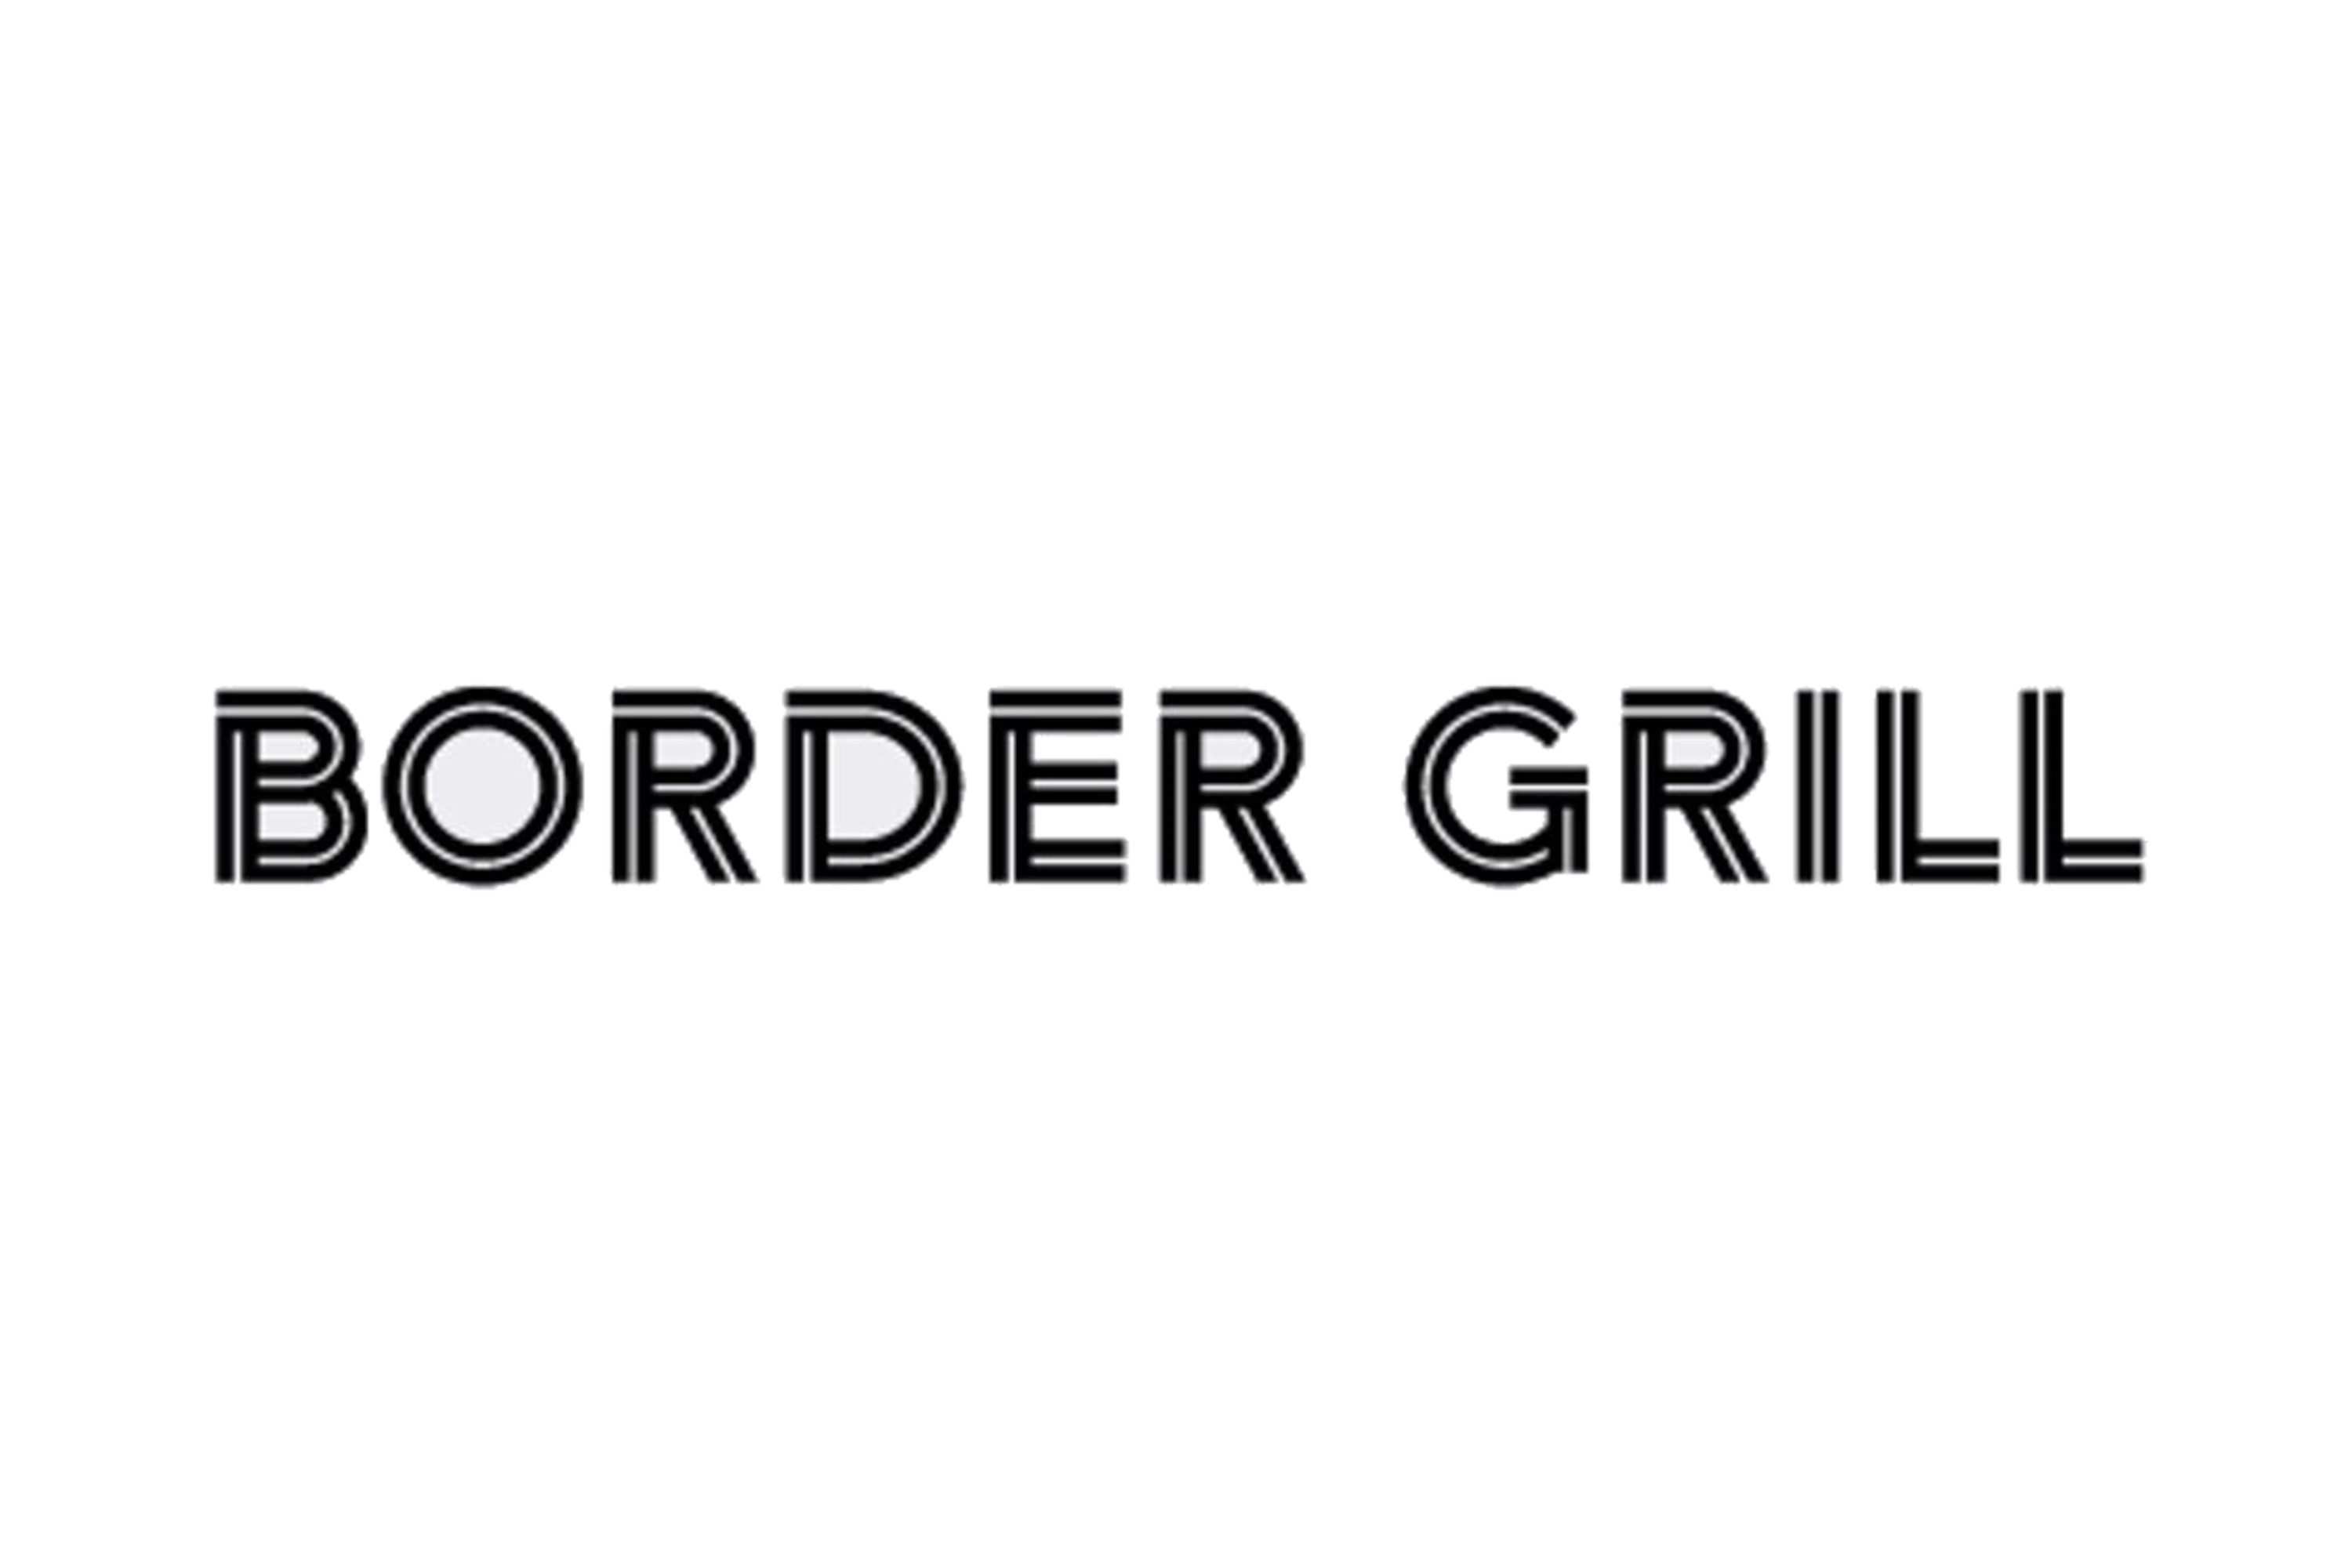 Text reads Border Grill in stylized text